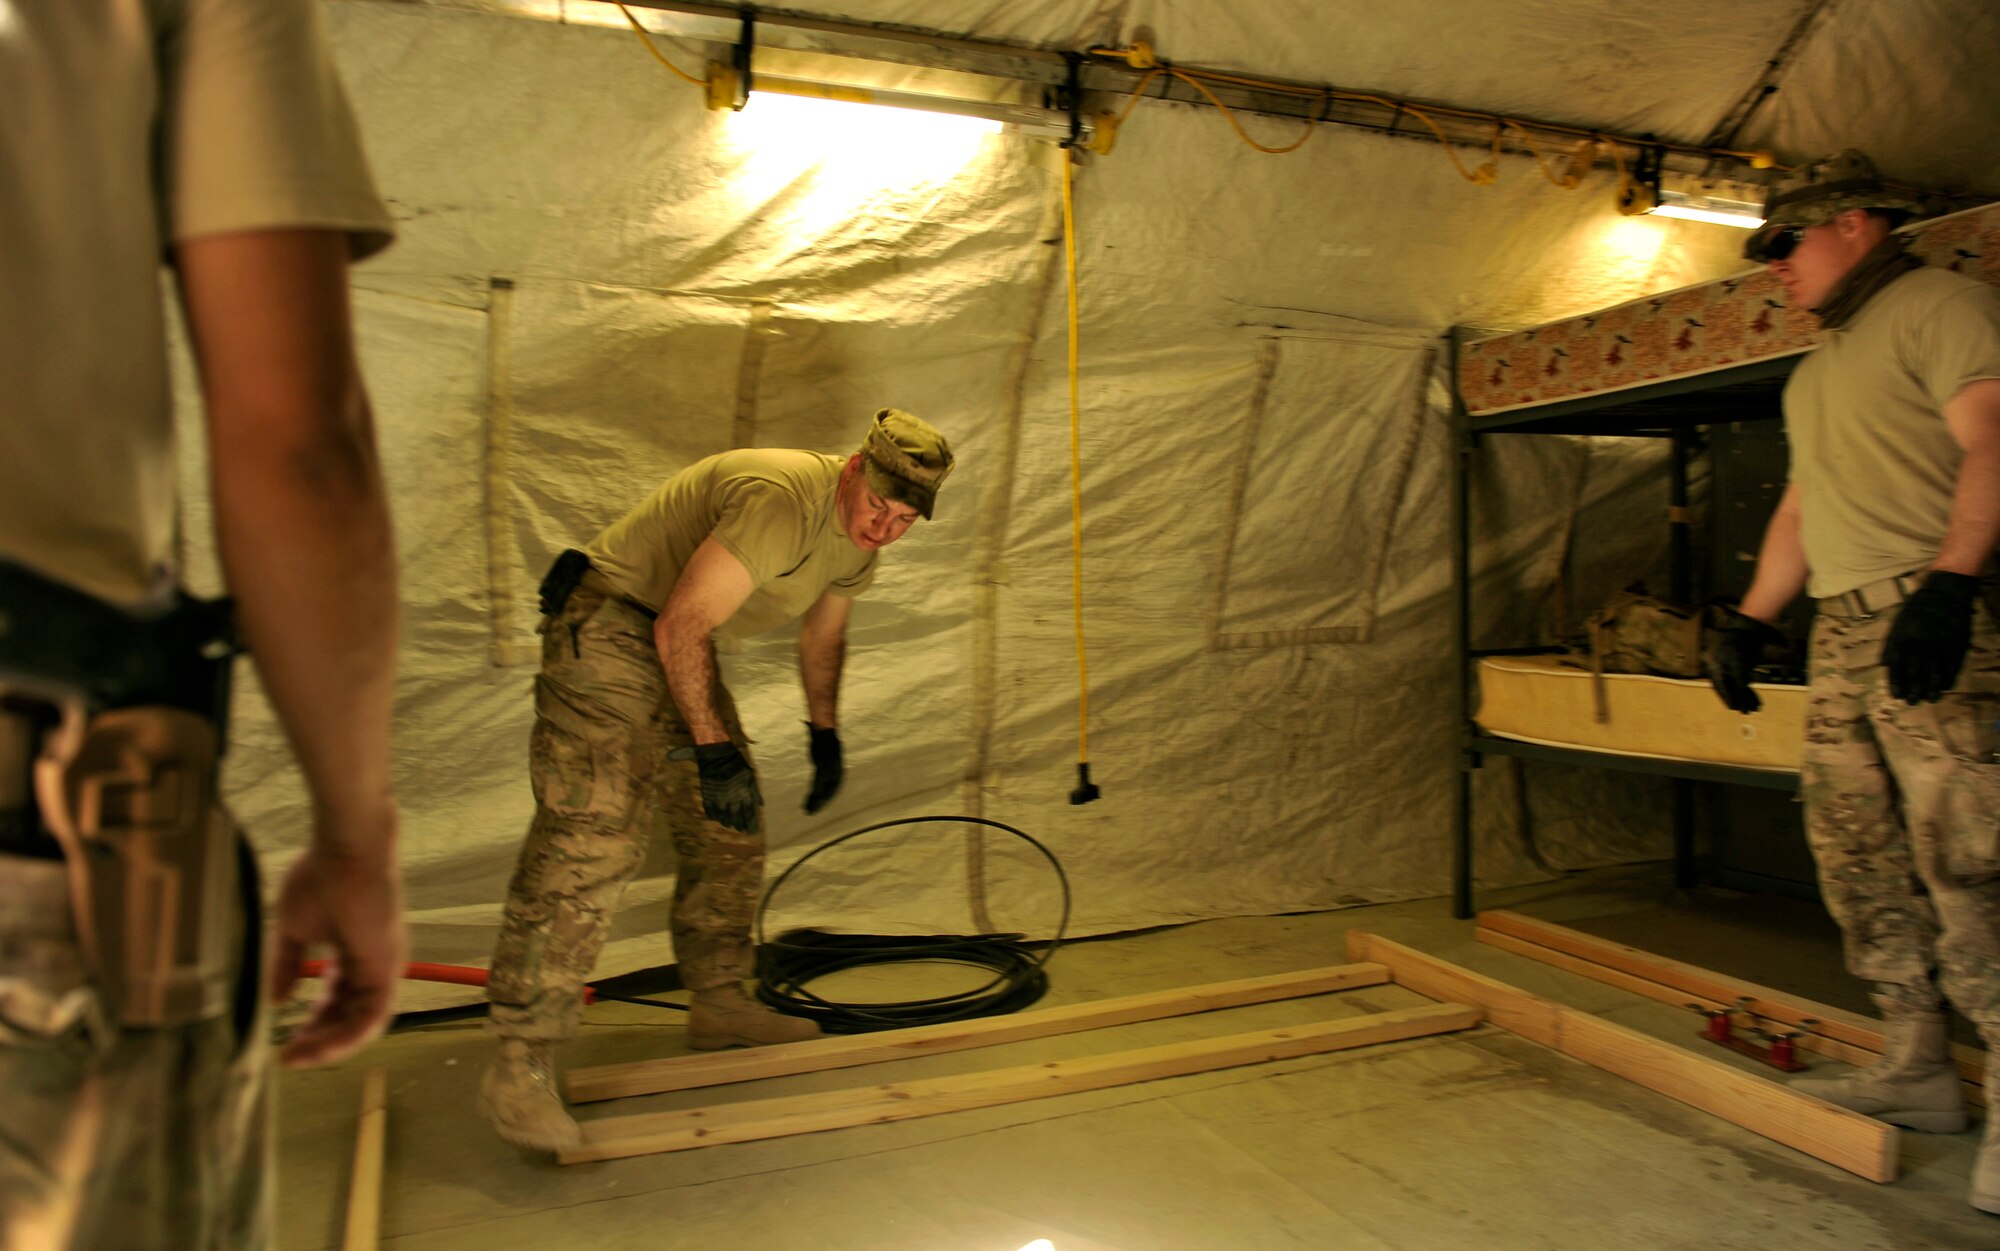 Master Sgt. Douglas Threatt, 455th Expeditionary Communications Squadron, frames out a computer tower for a future communication equipment room on Bagram Airfield, Afghanistan. The room will contain networking equipment providing connectivity for the Jordanian forces. Threatt is deployed from Ramstein Air Base, Germany. (U.S. Air Force photo/ Staff Sgt. Stephenie Wade)